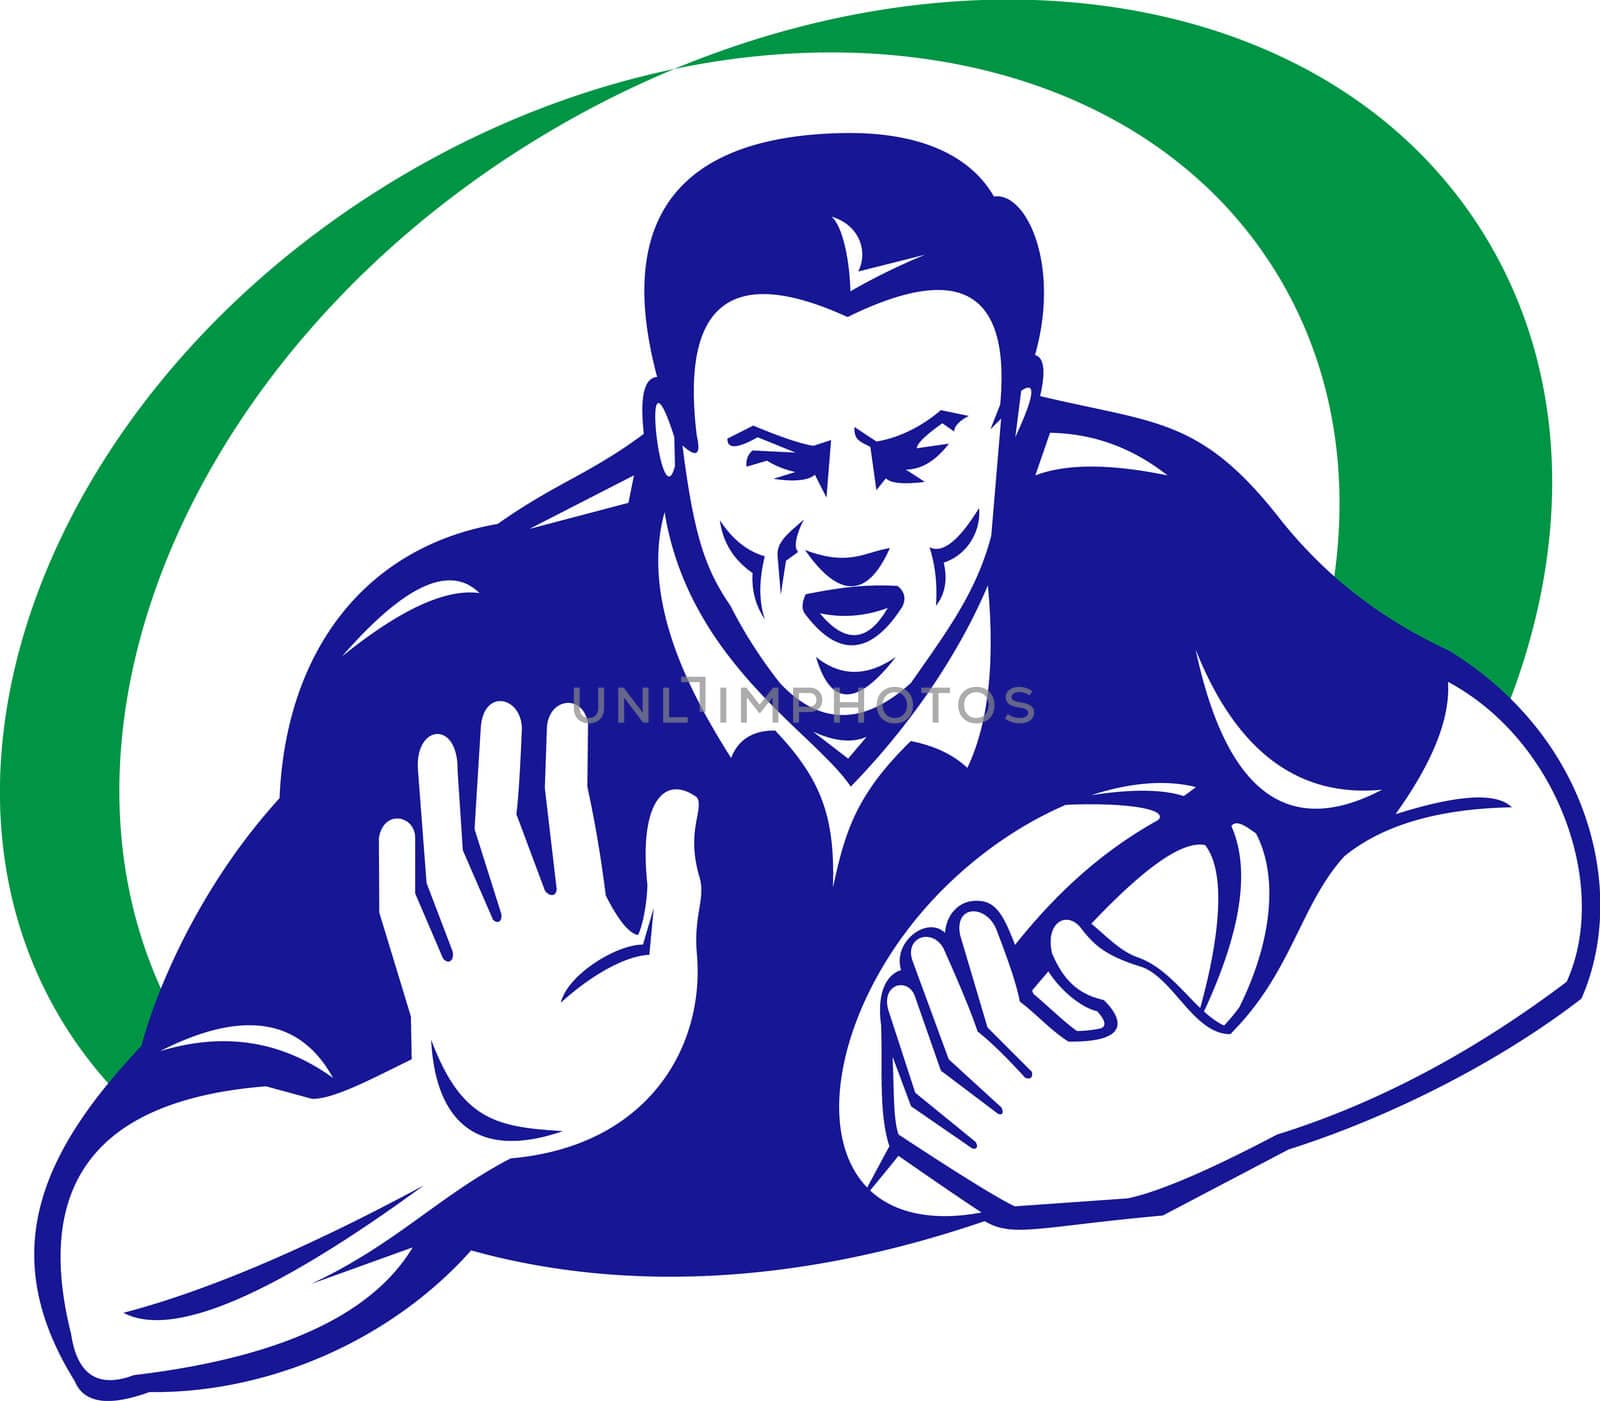 illustration of a rugby player with ball fending off isolated on white background done in retro style